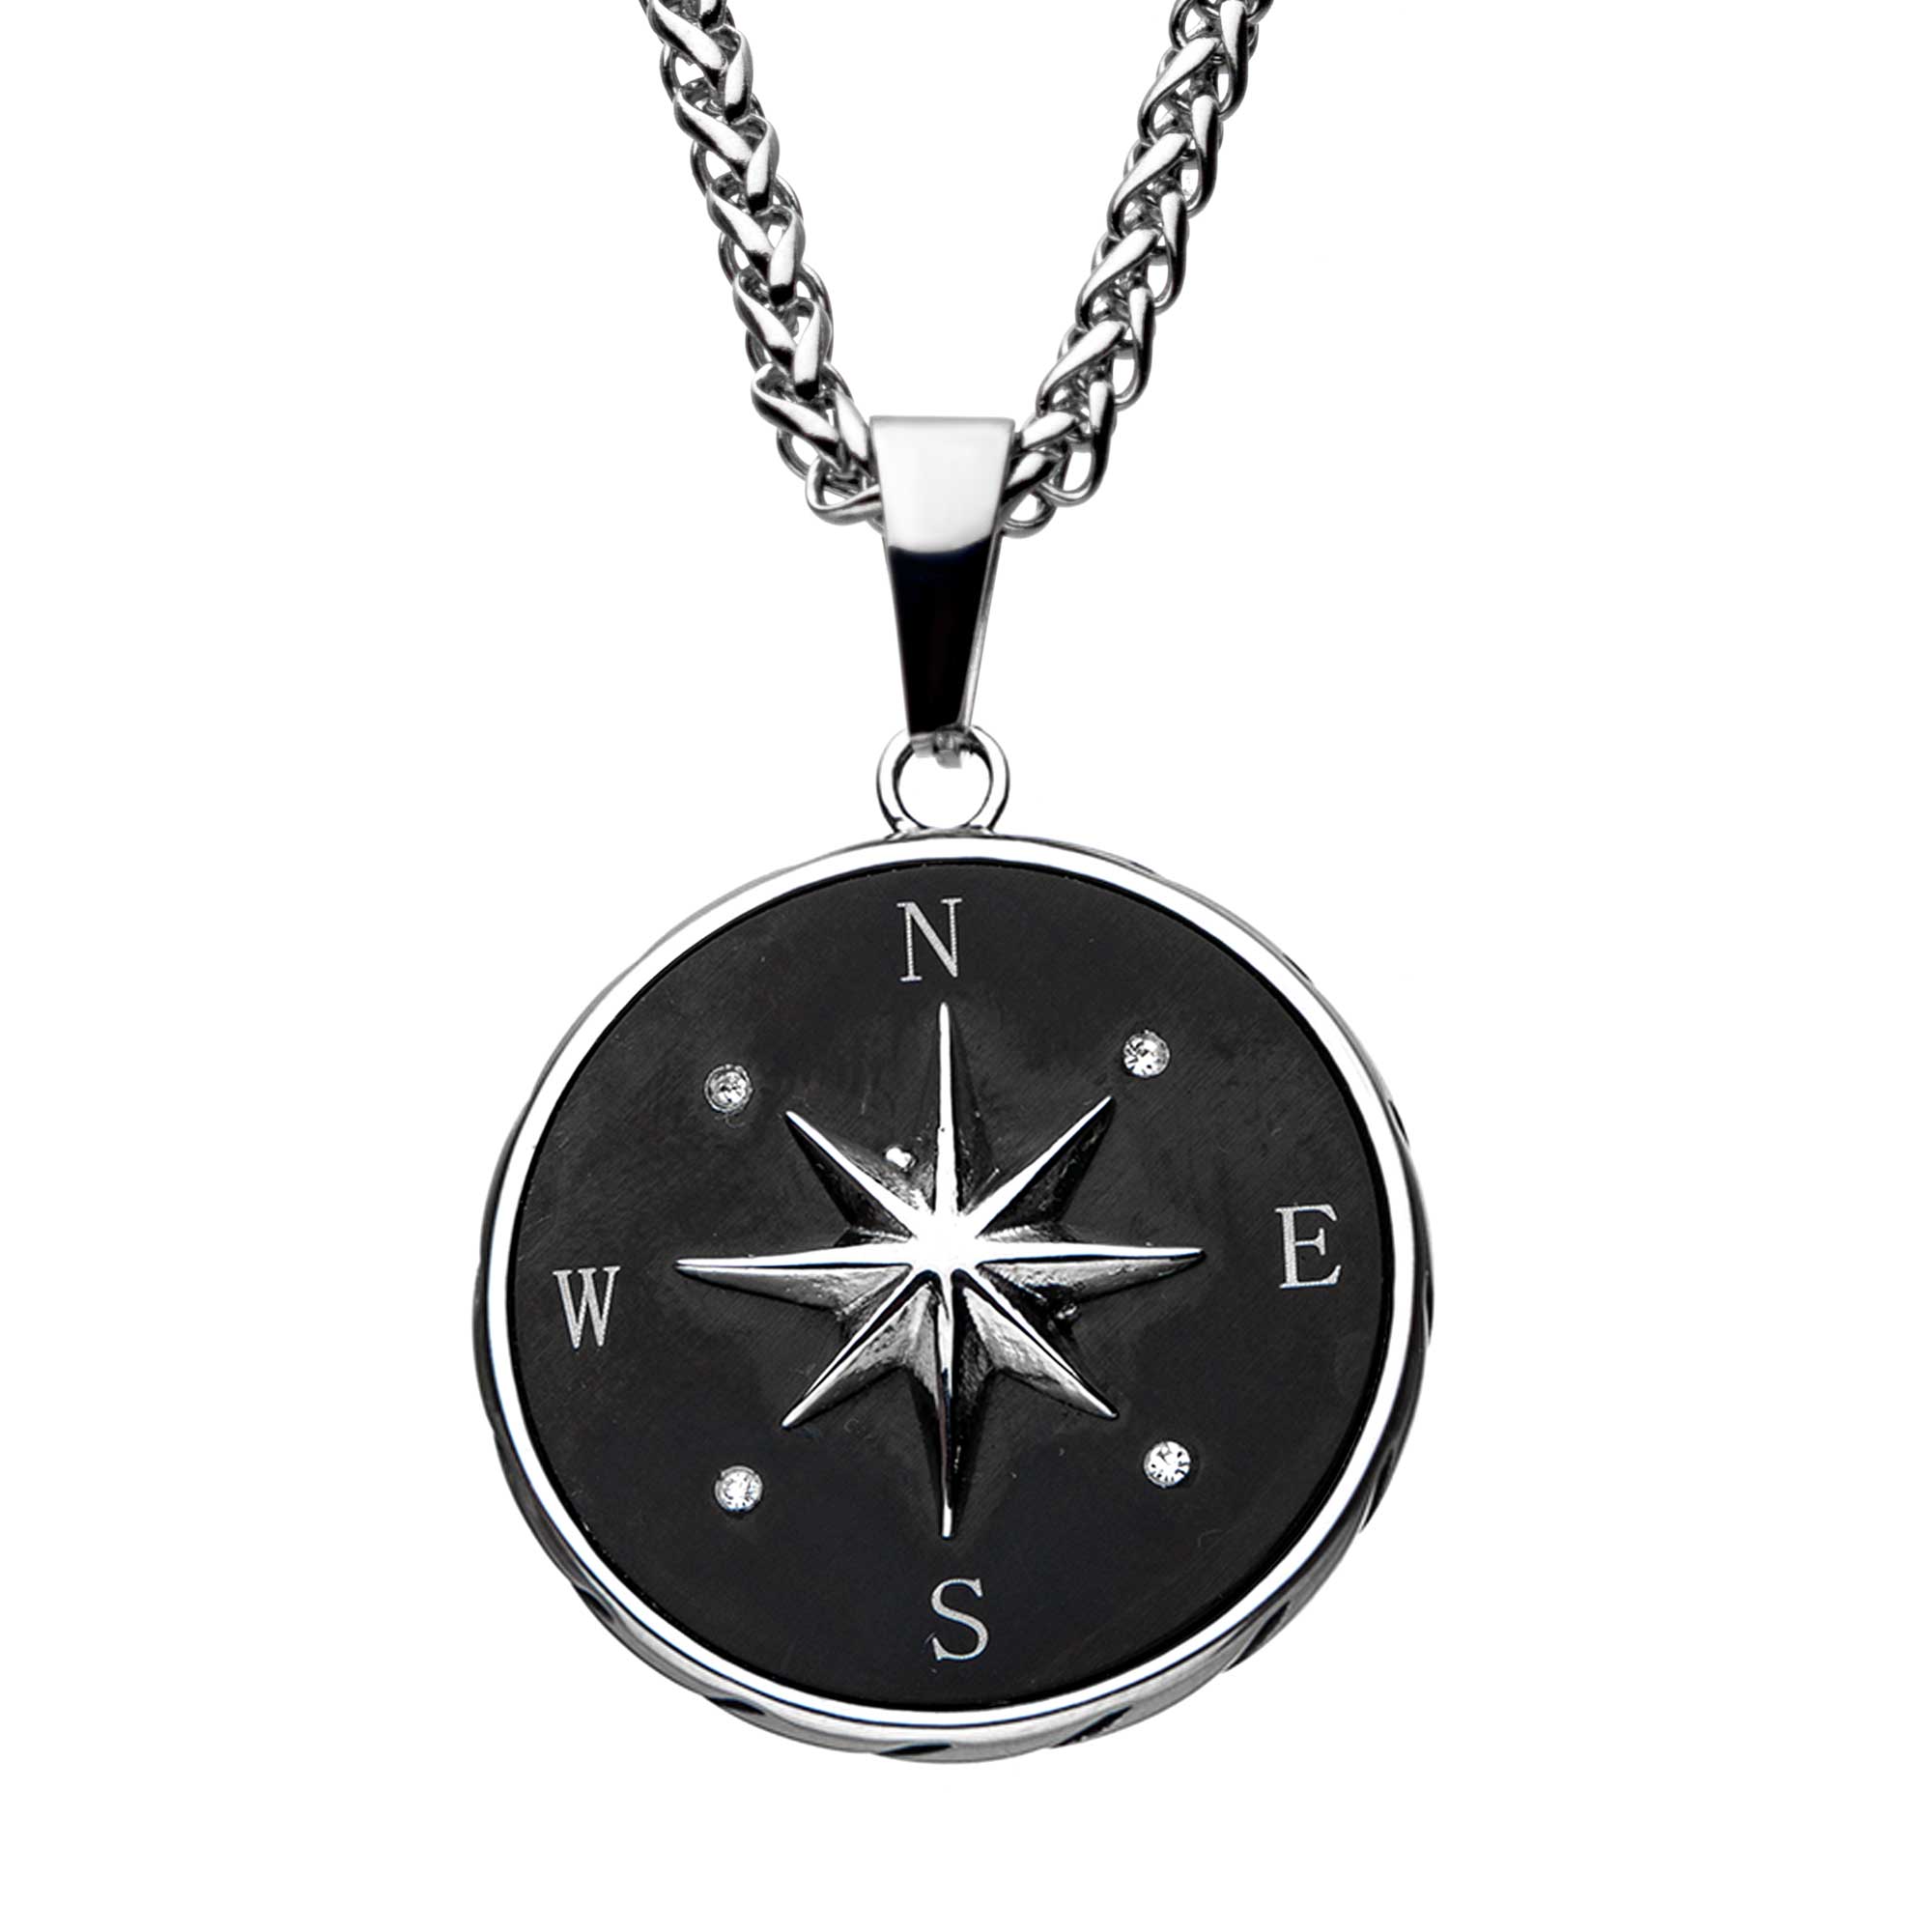 Stainless Steel and Black Plated Compass Pendant with Chain Lewis Jewelers, Inc. Ansonia, CT